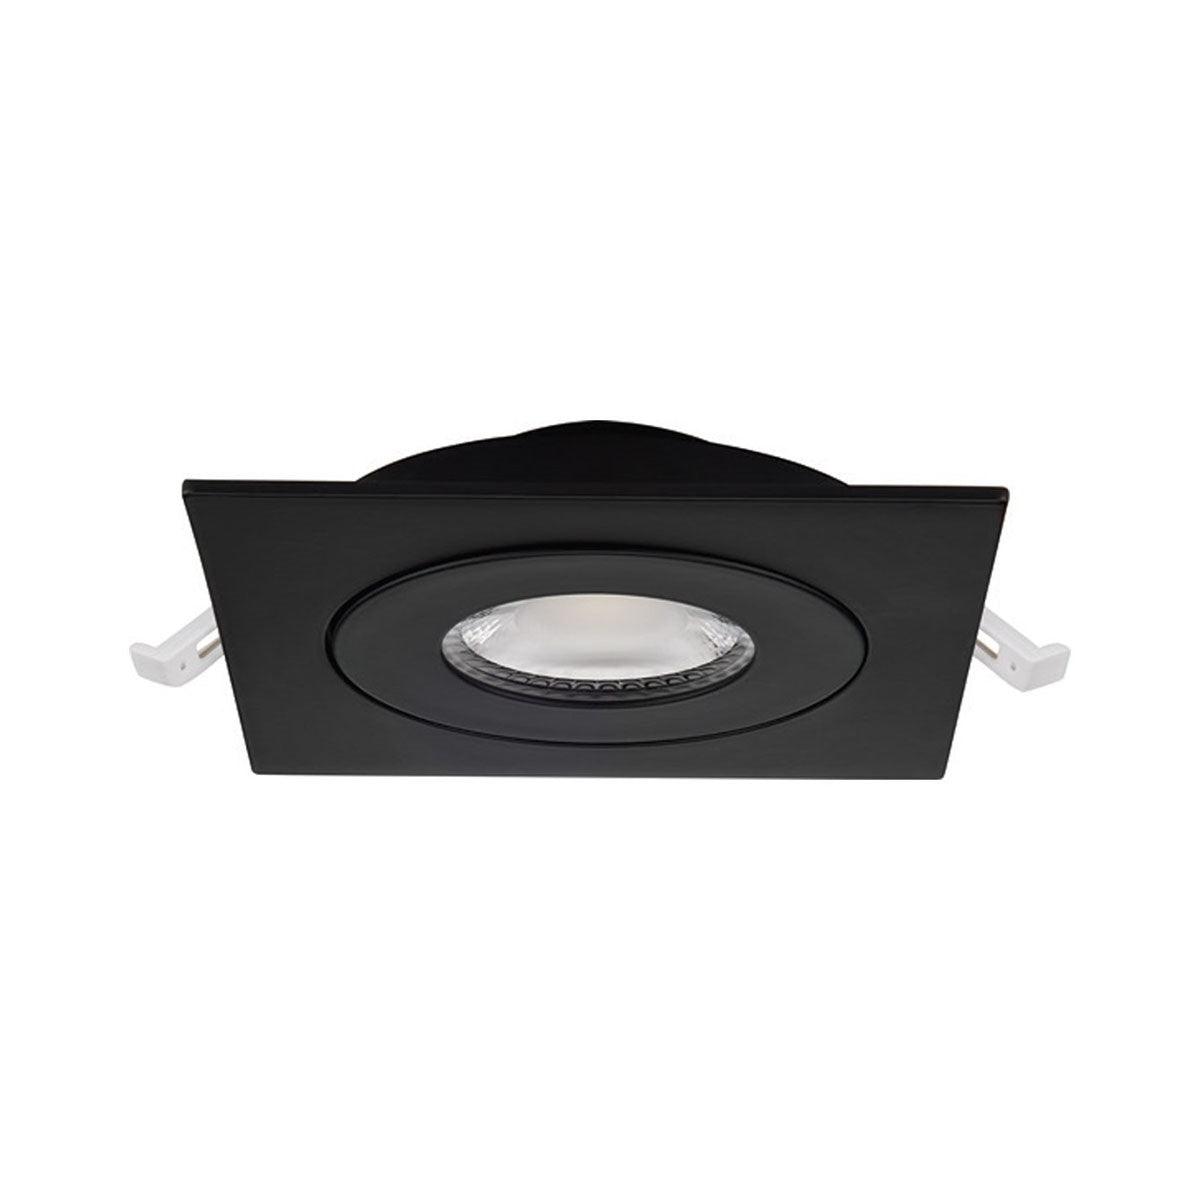 4 Inch Square Gimbal Downlight with Remote Driver, Square, 9 Watt, 750 Lumens, Selectable CCT, 2700K to 5000K, Remote Driver, Black Finish